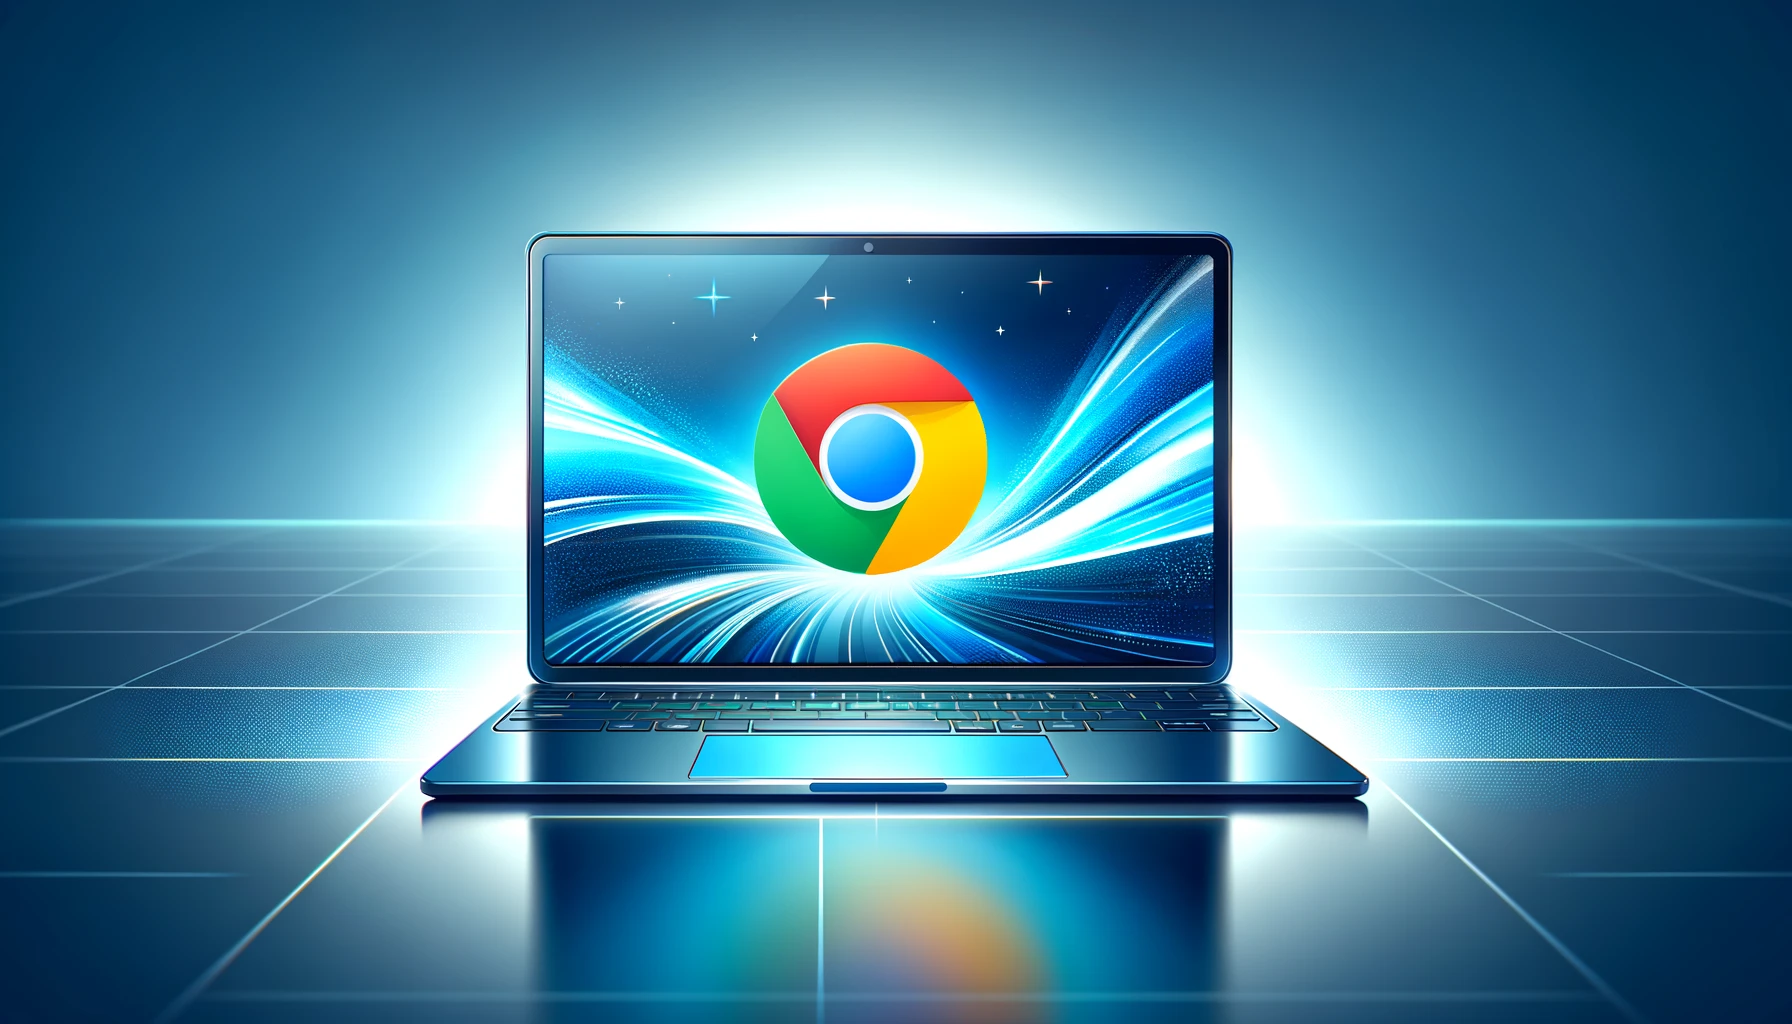 Chrome introduces a new and native version for ARM-based Windows laptops